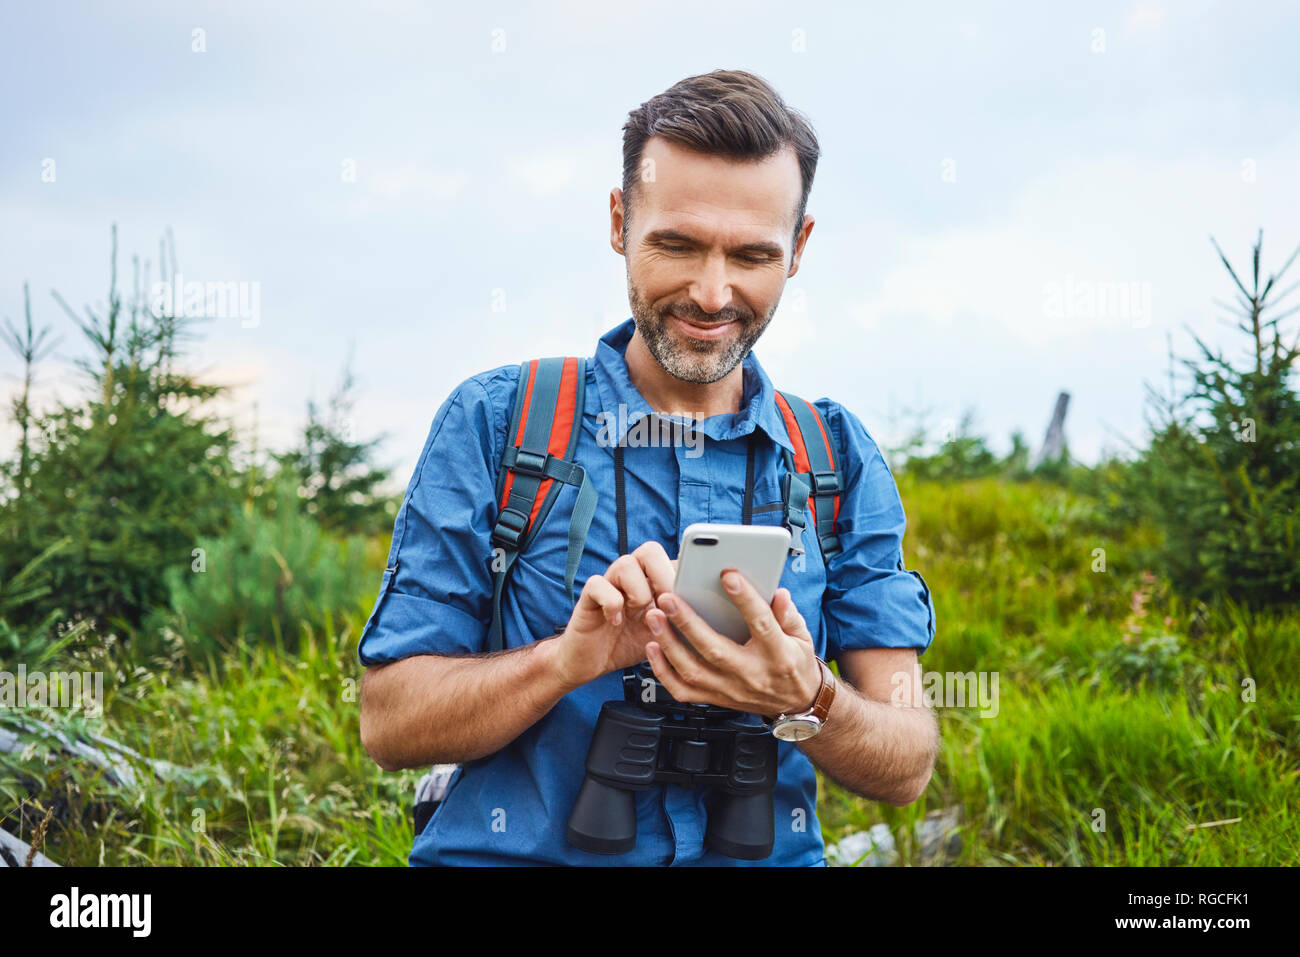 Smiling man checking his cell phone during hiking trip Stock Photo